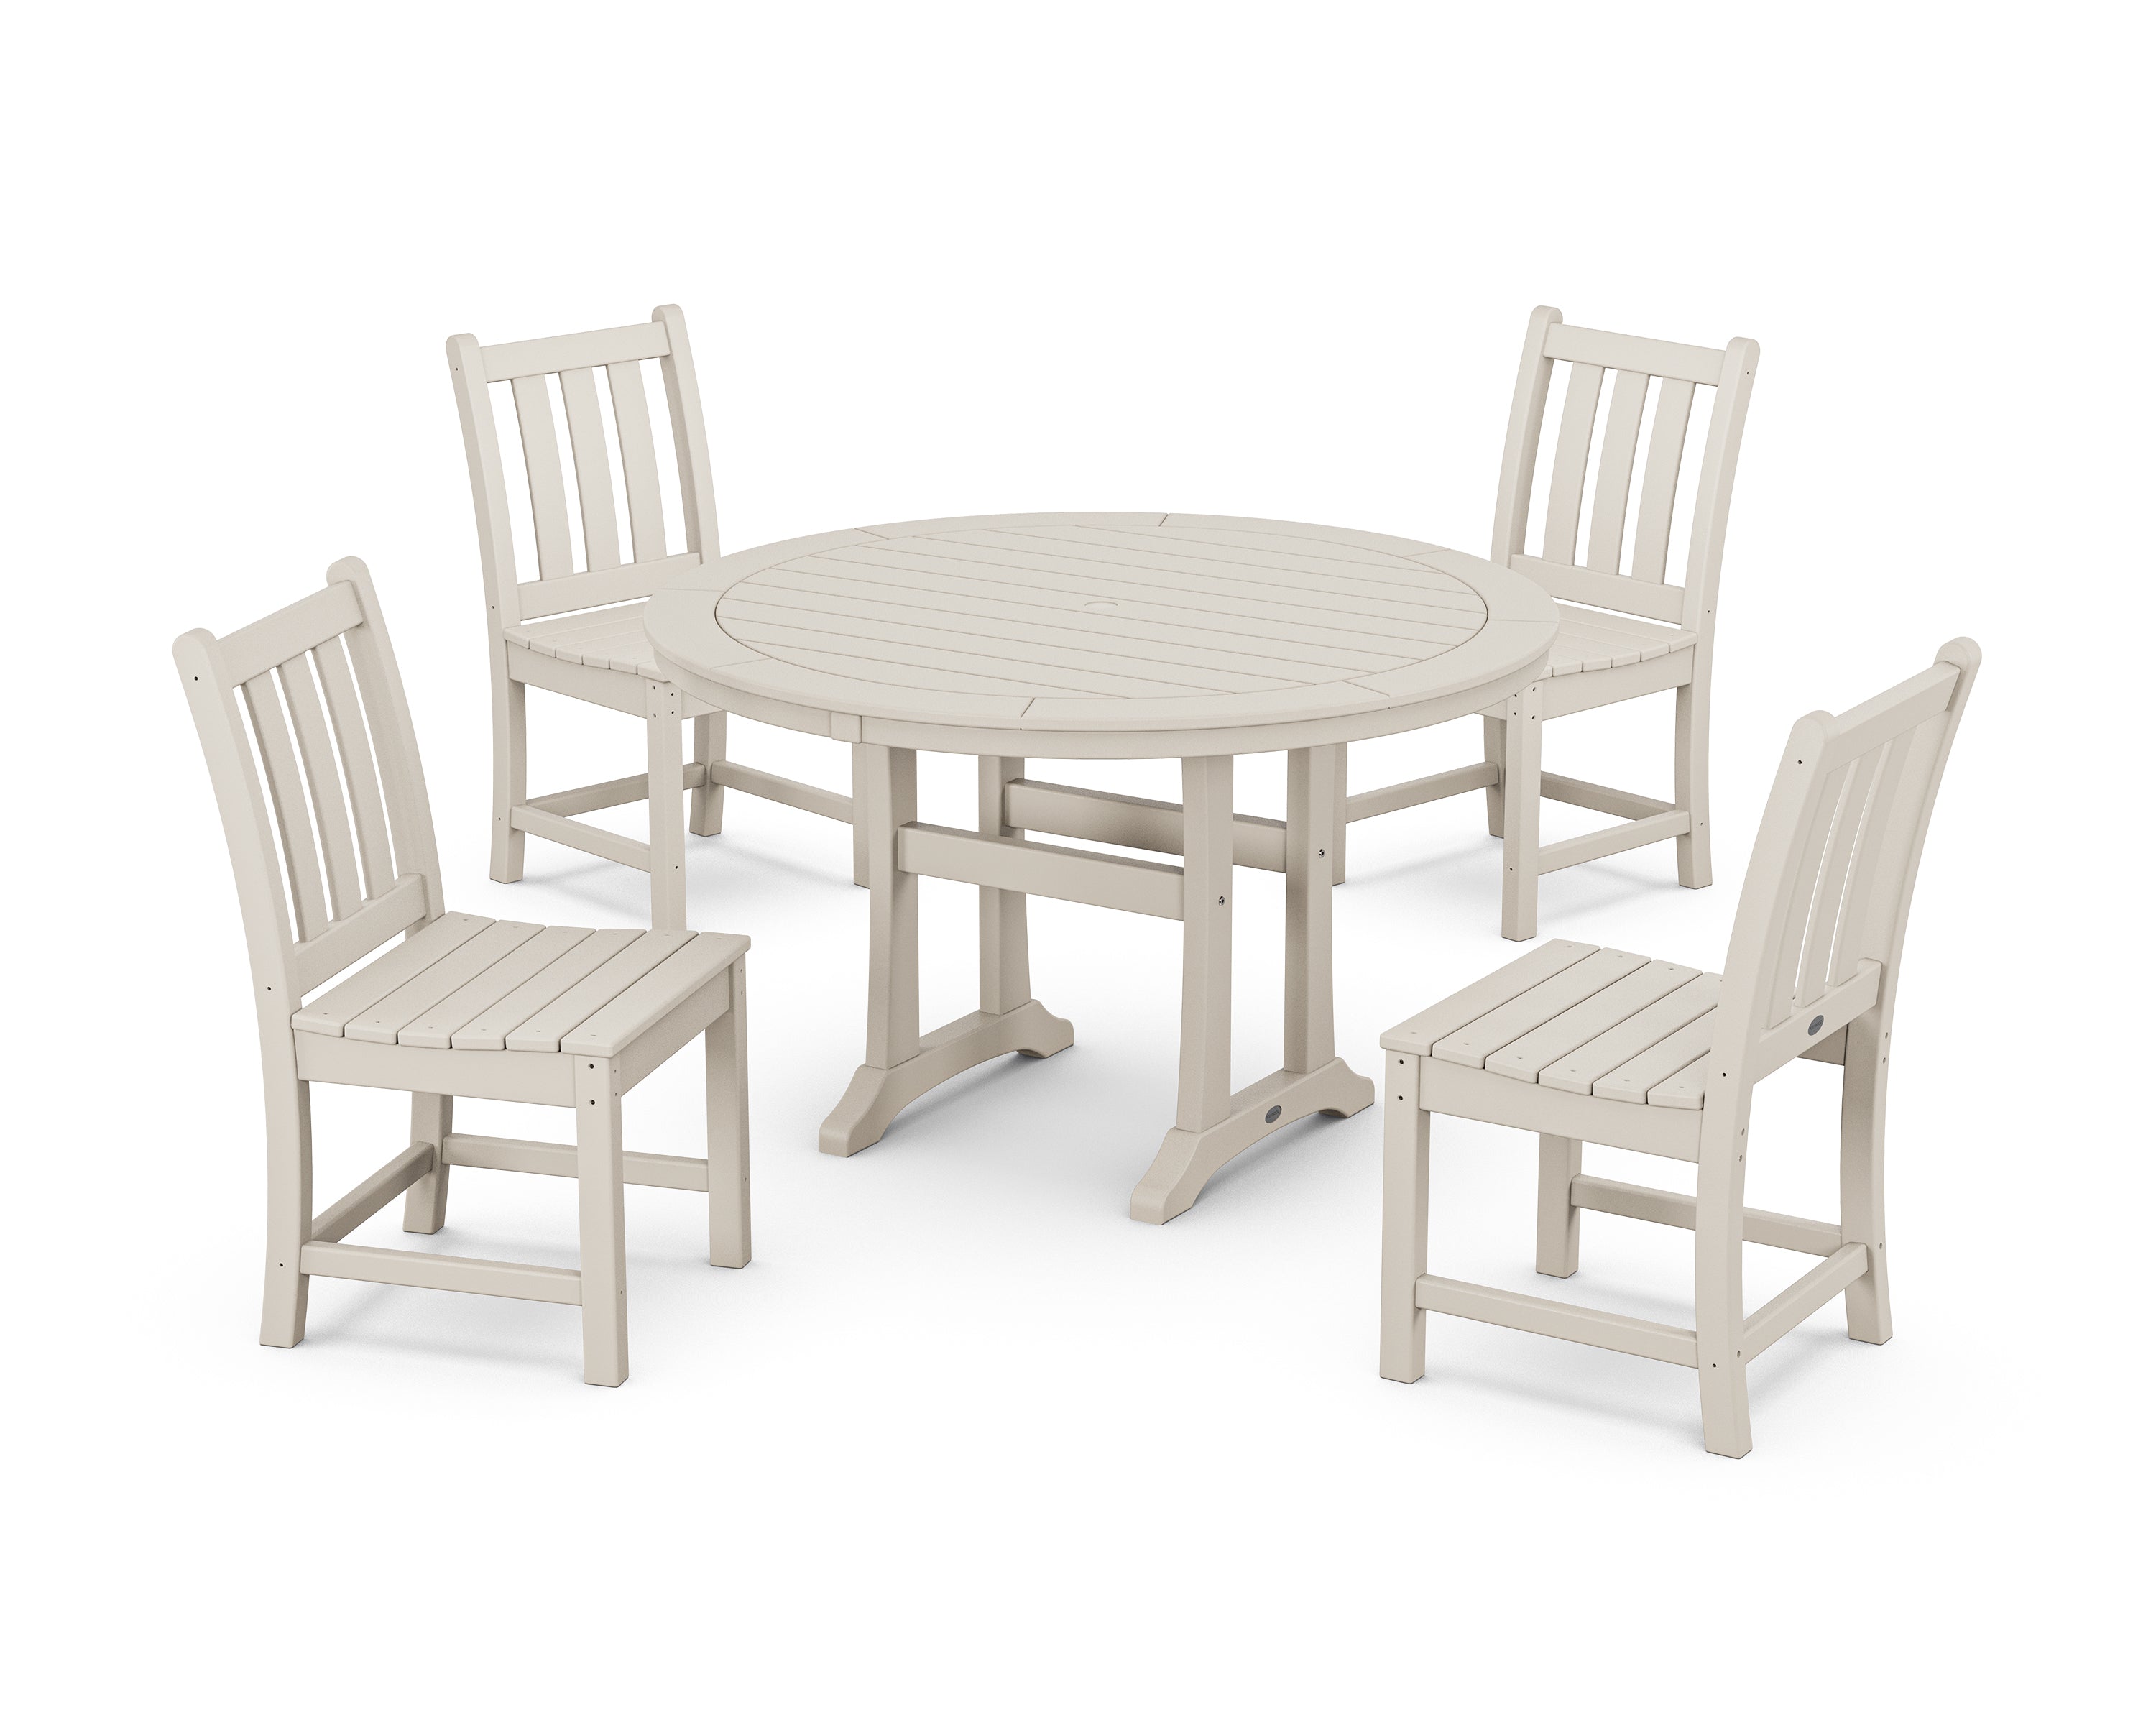 POLYWOOD® Traditional Garden Side Chair 5-Piece Round Dining Set With Trestle Legs in Sand